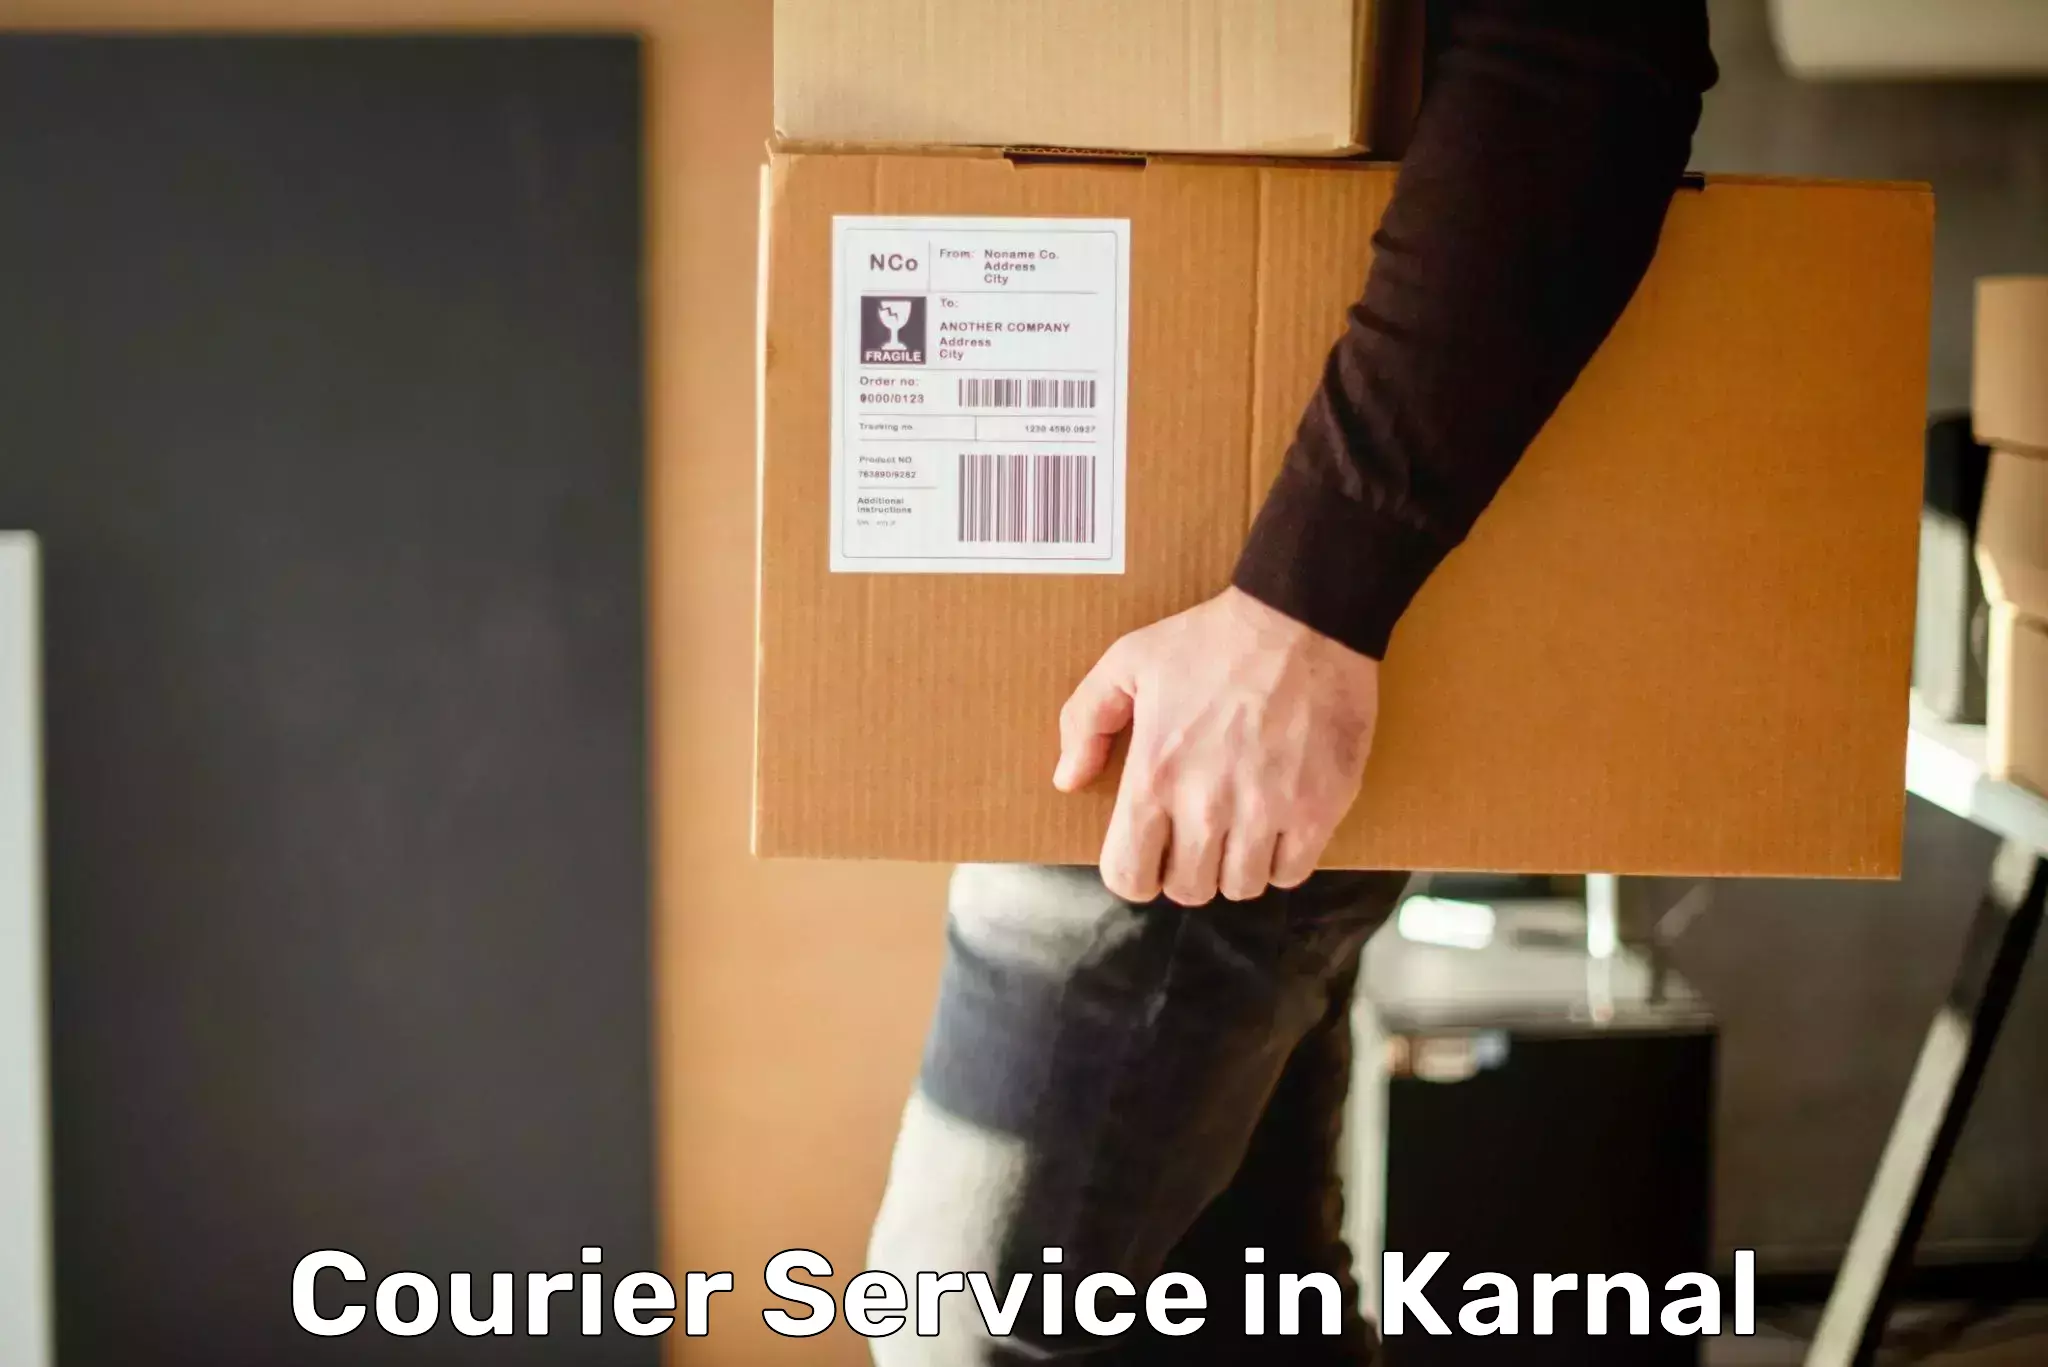 Customer-oriented courier services in Karnal